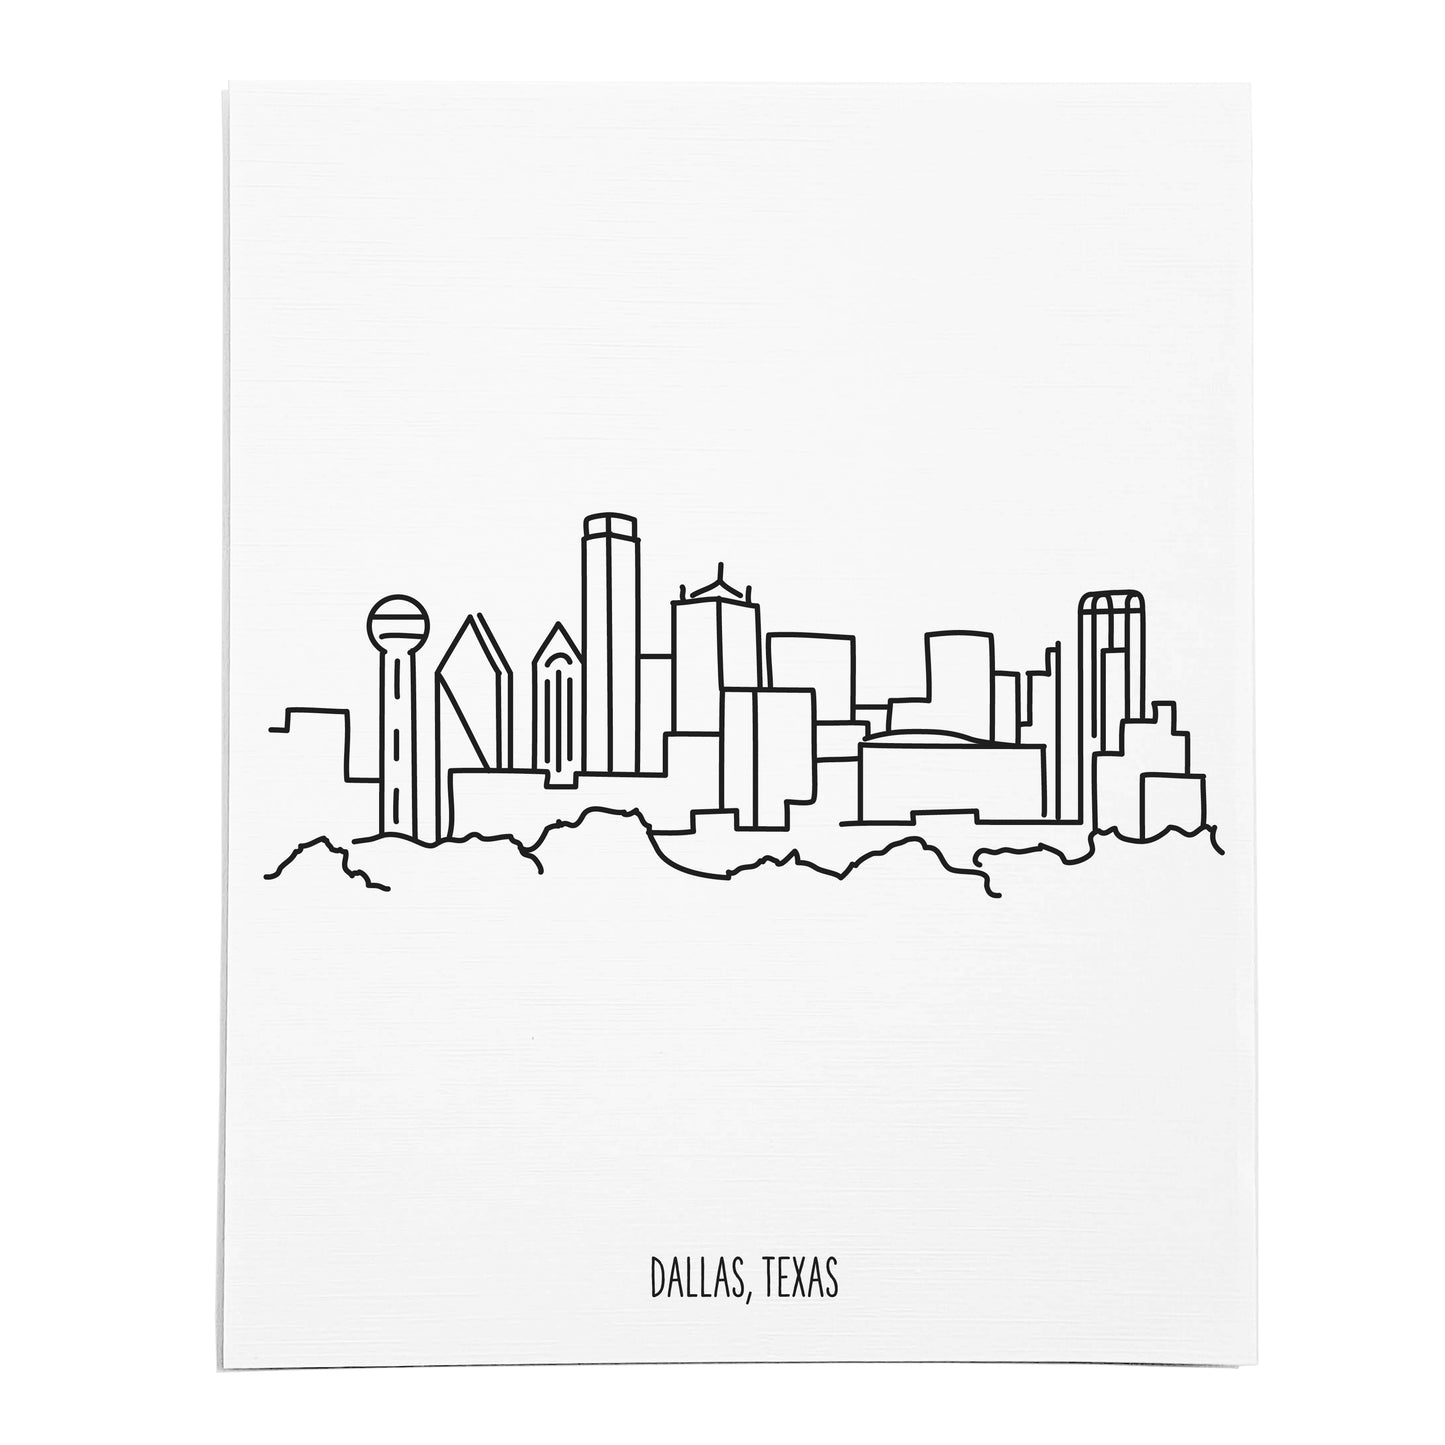 An art print featuring a line drawing of the Dallas Skyline on white linen paper